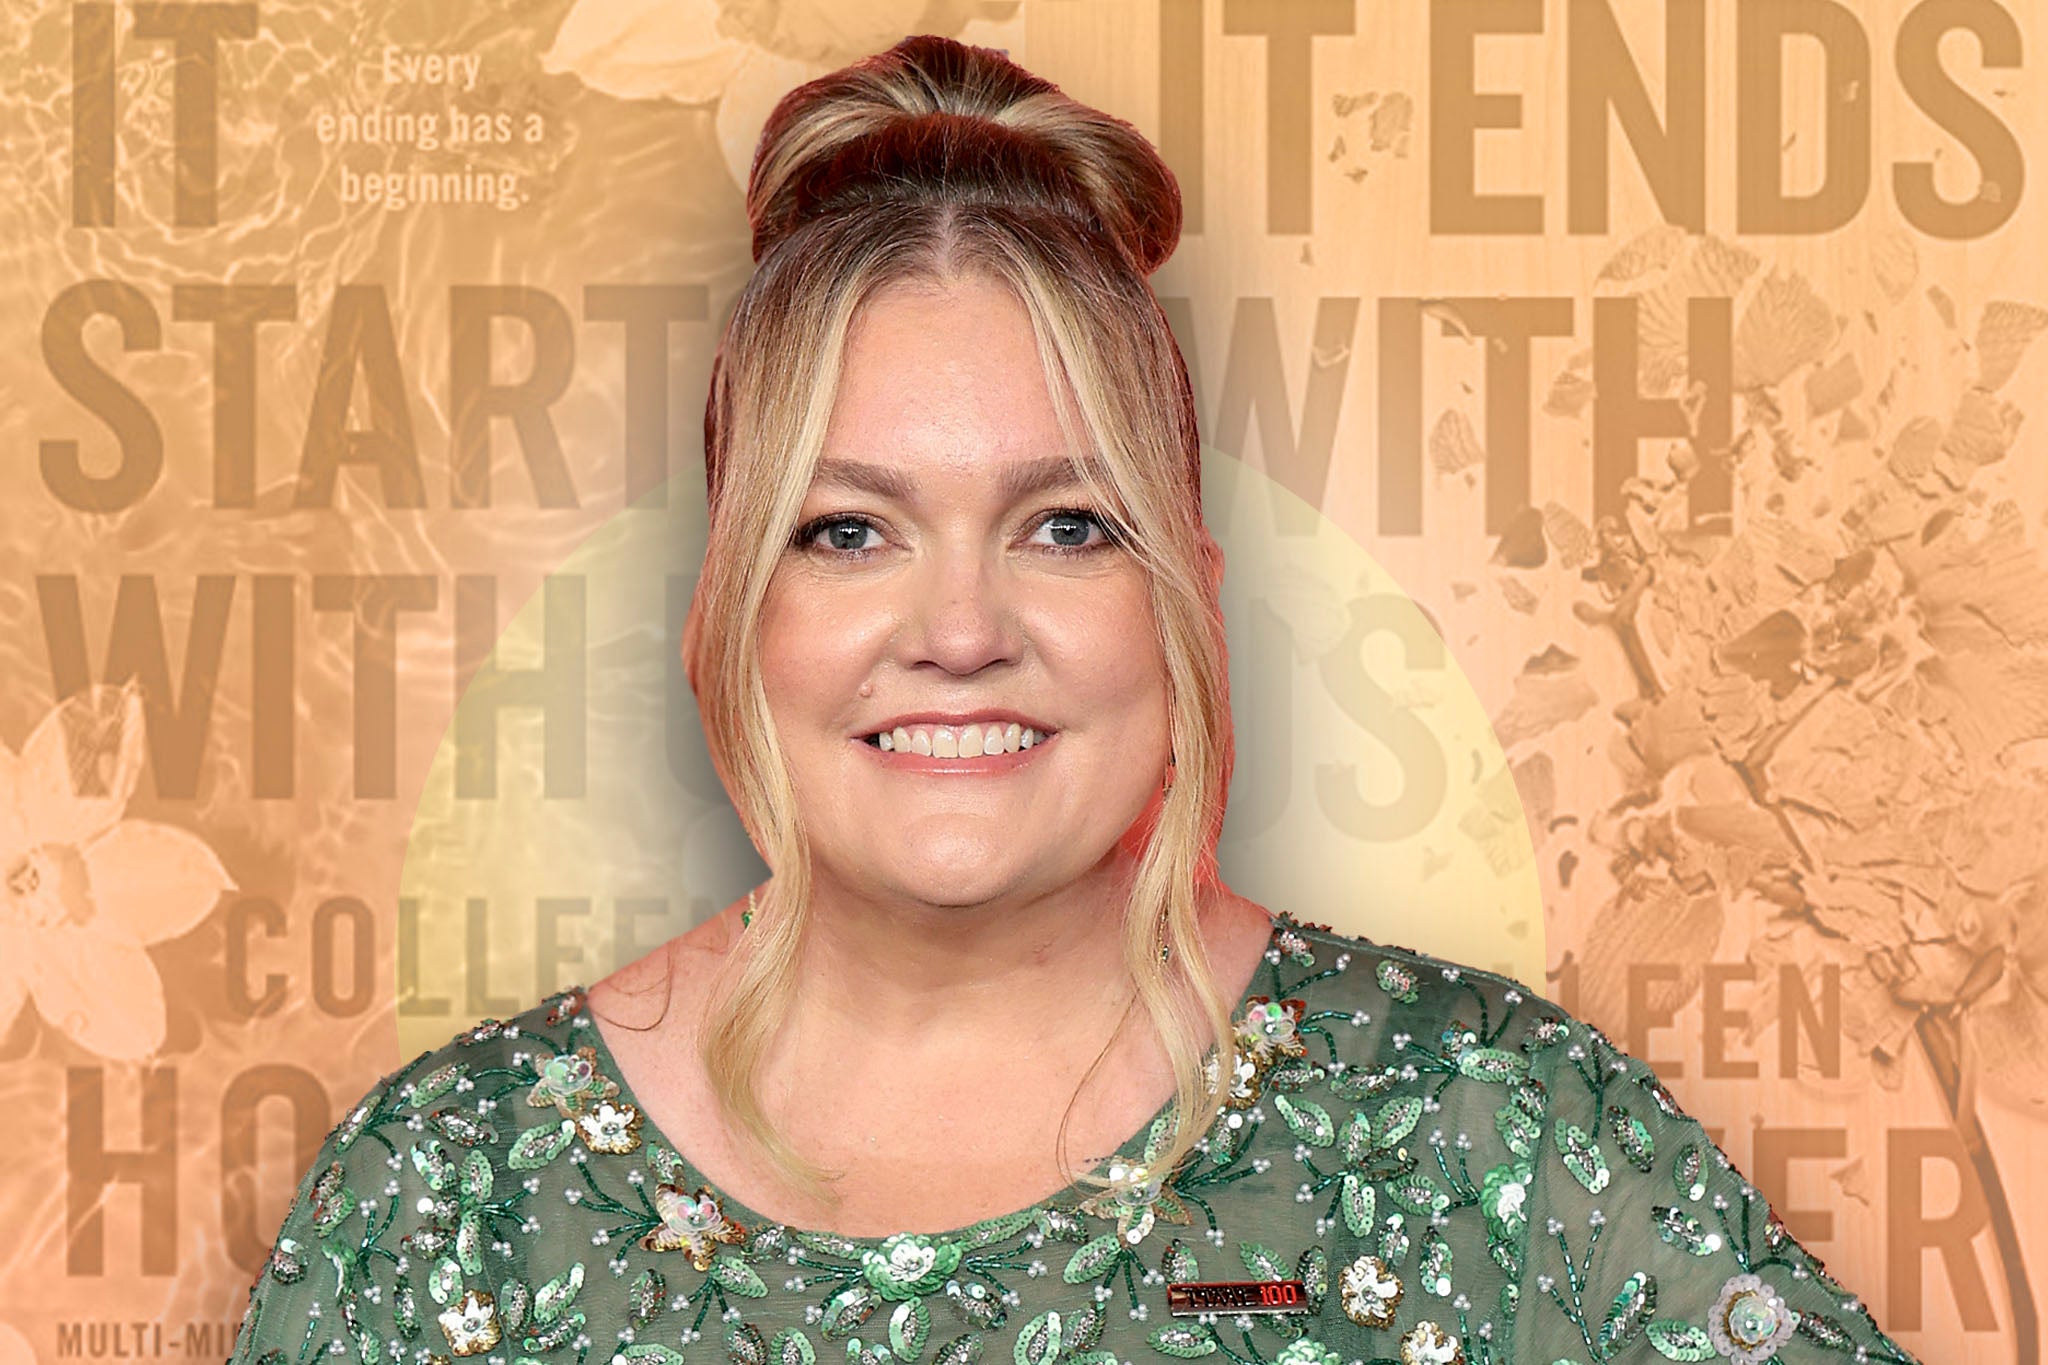 Who Is Colleen Hoover, the Texas Author Taking the Romance Genre